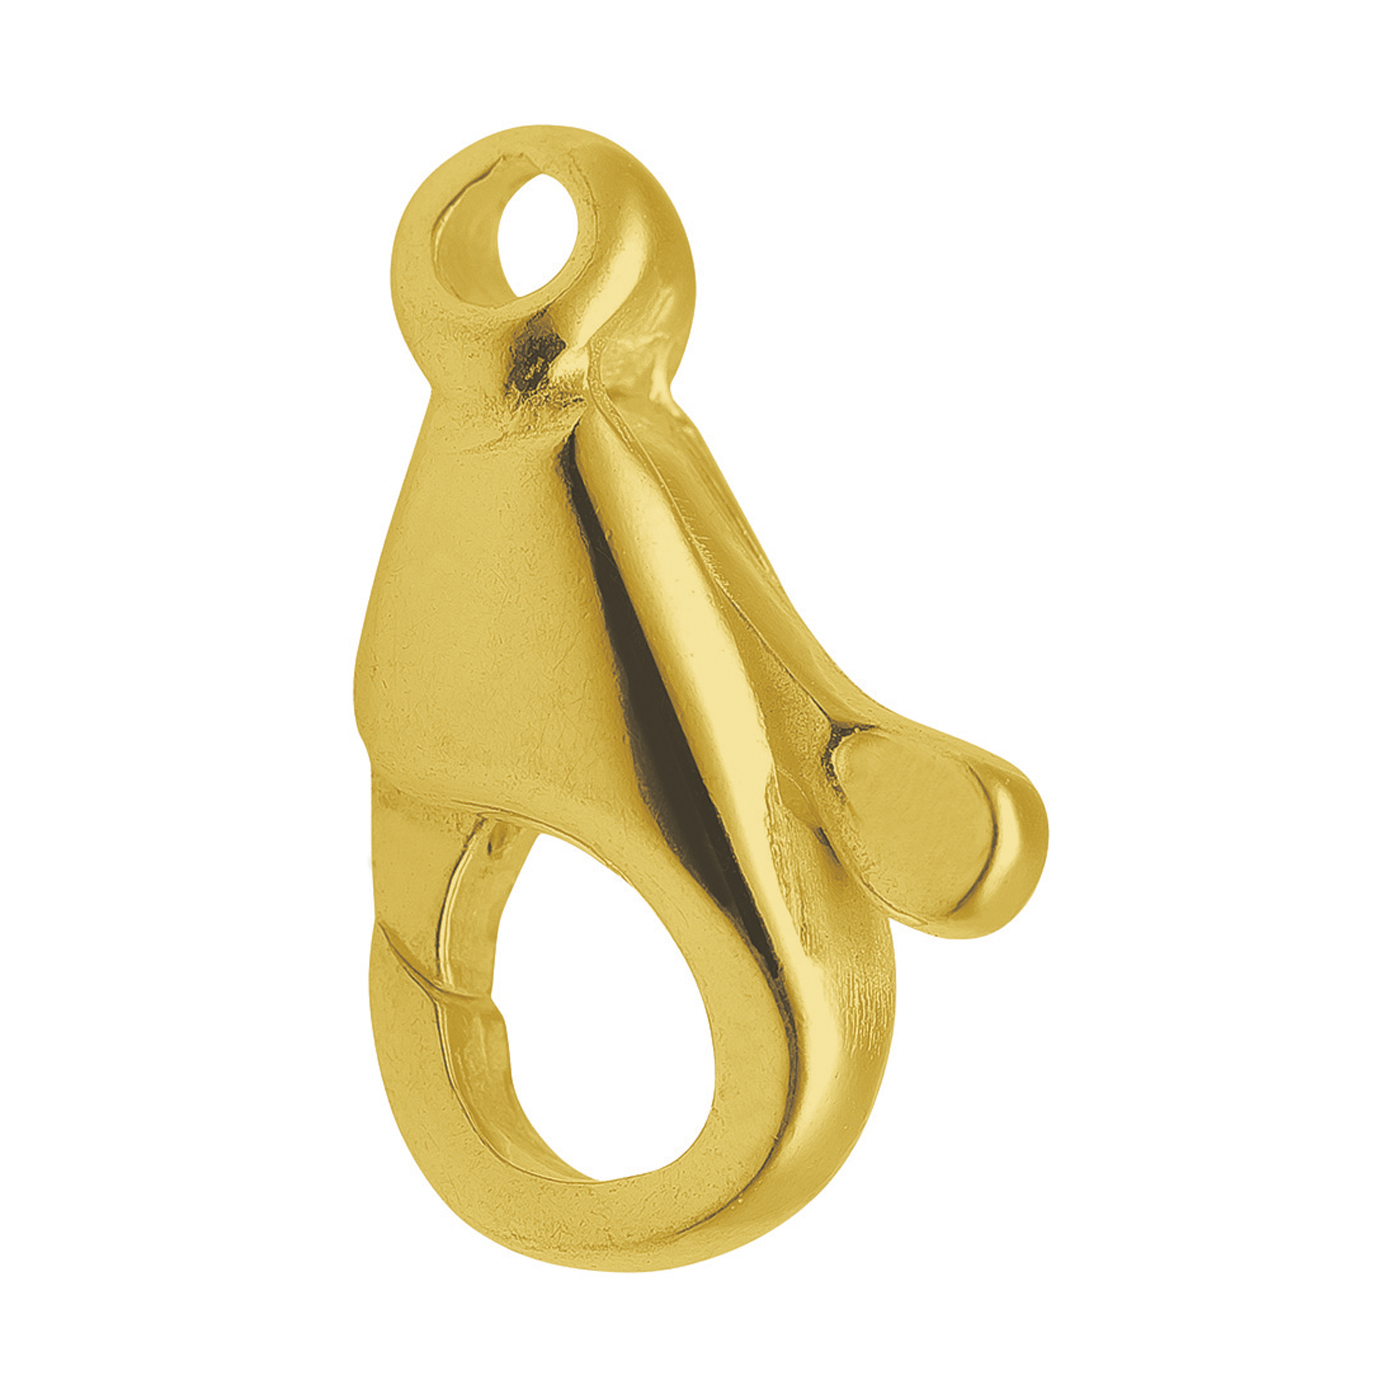 Lobster Clasp, 585G, 5 x 10 mm, Cast - 1 piece